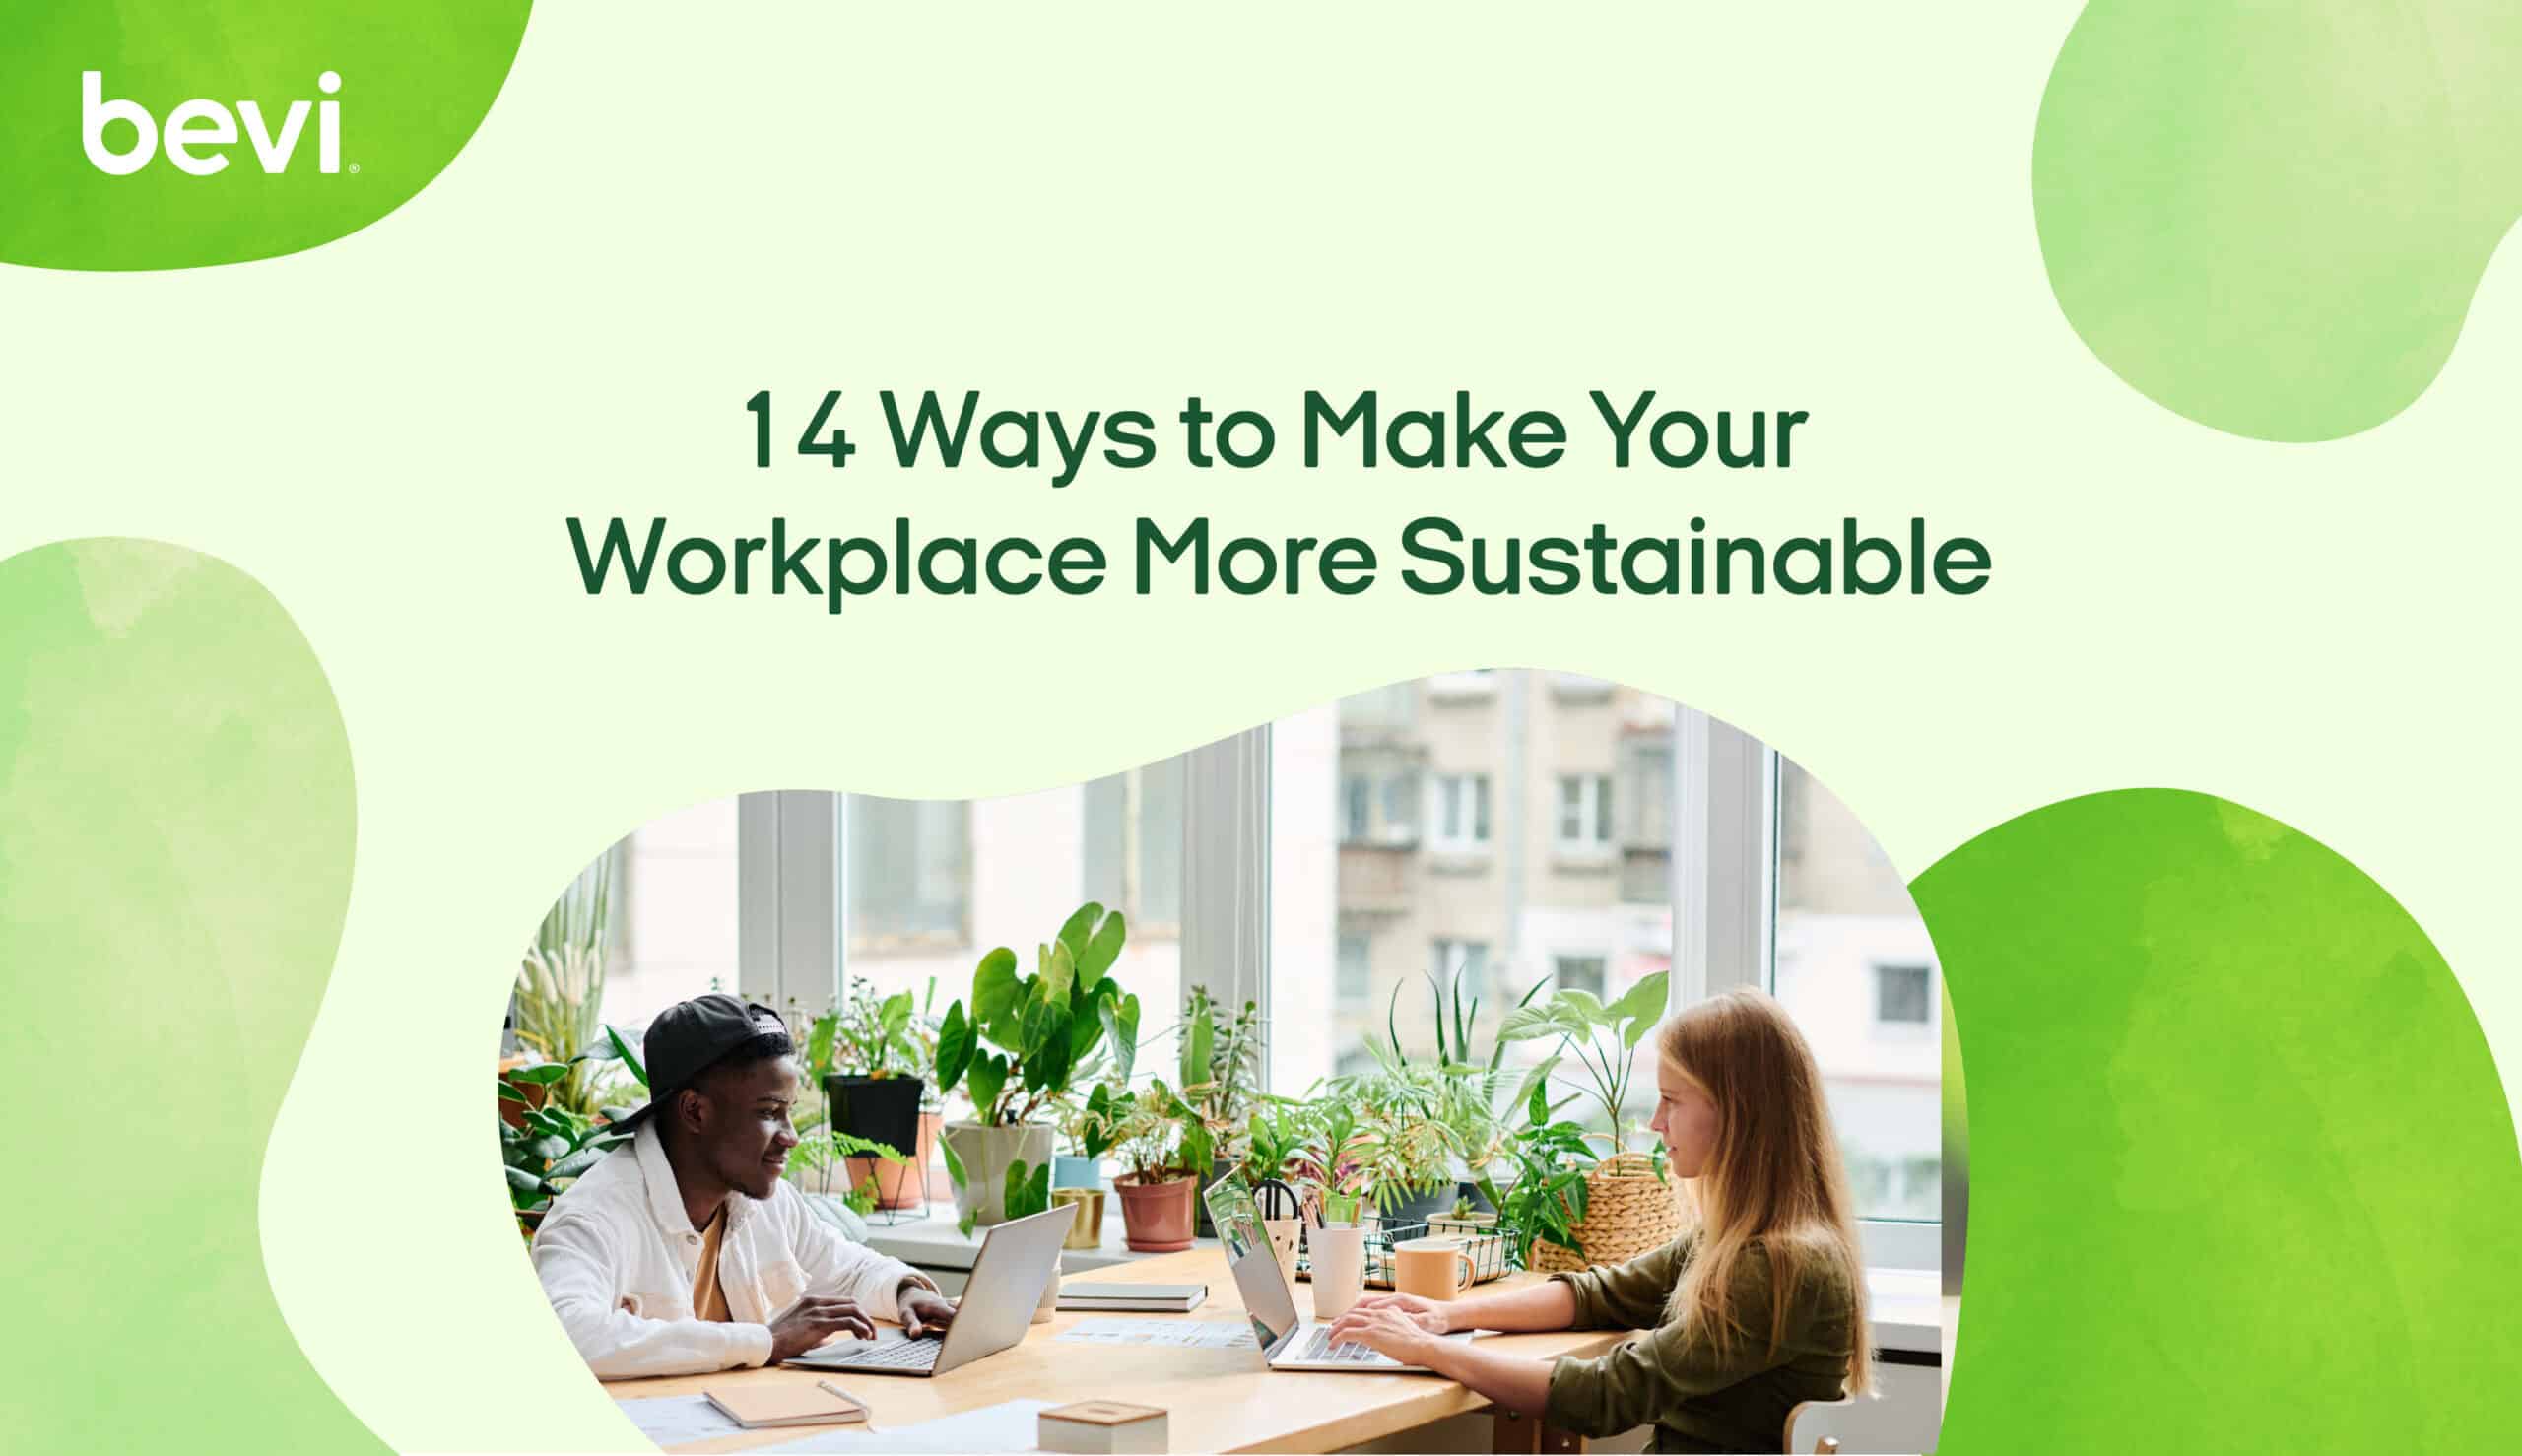 14 Ways to Make Your Workplace More Sustainable